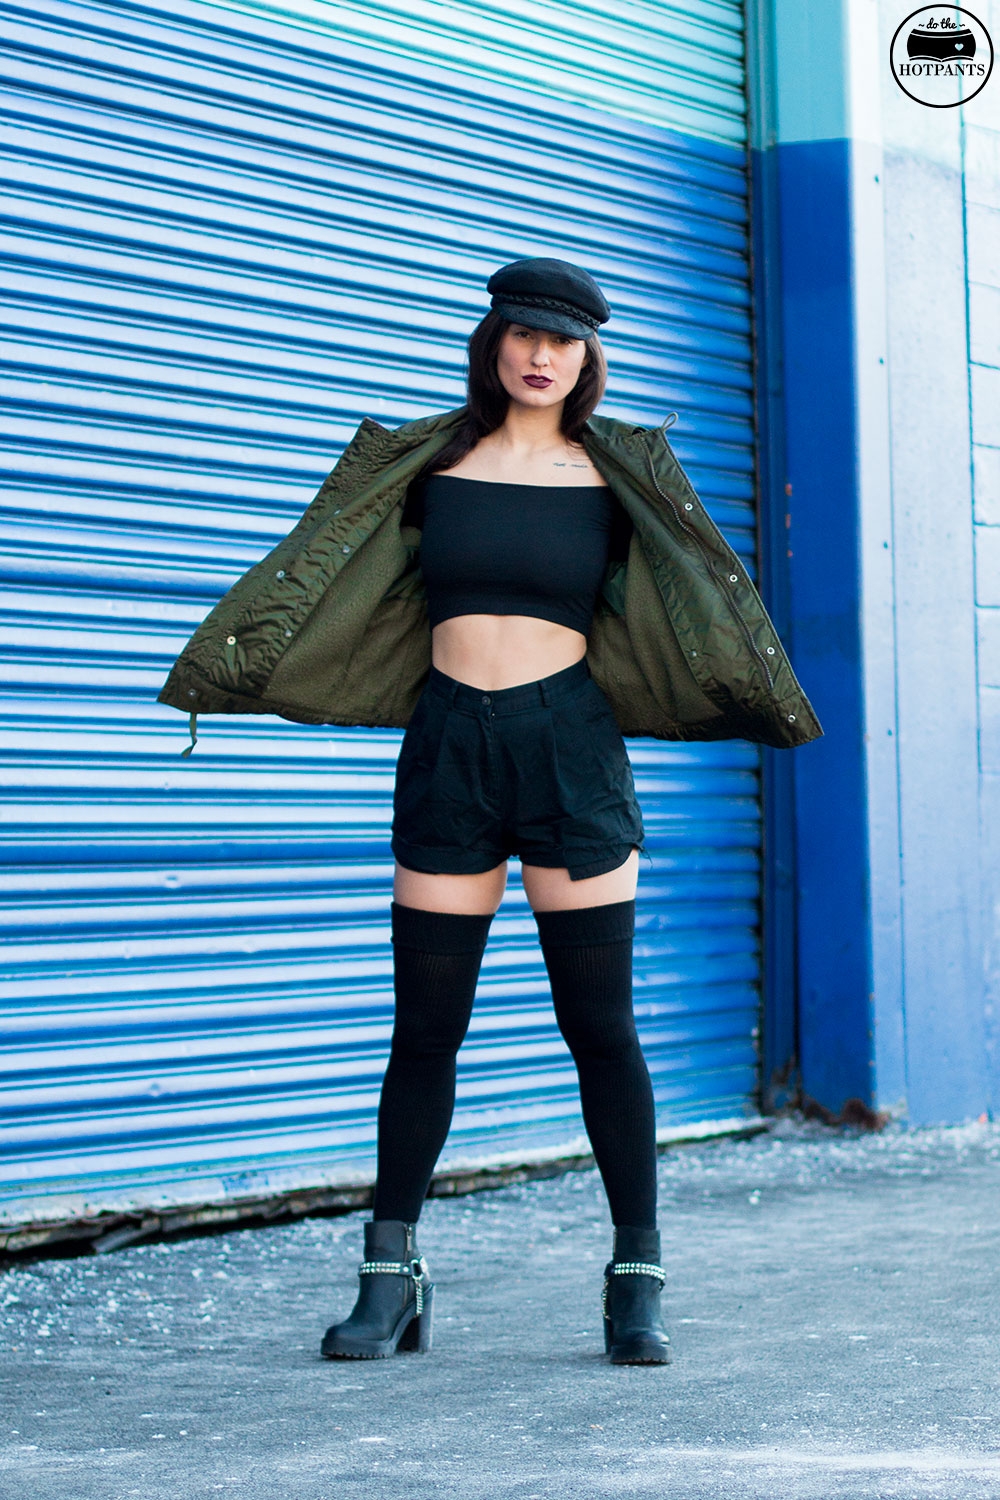 Do The Hotpants Dana Suchow Bomber Jacket Crop Top Thigh Highs Curvy Woman NYC Fashion IMG_7938